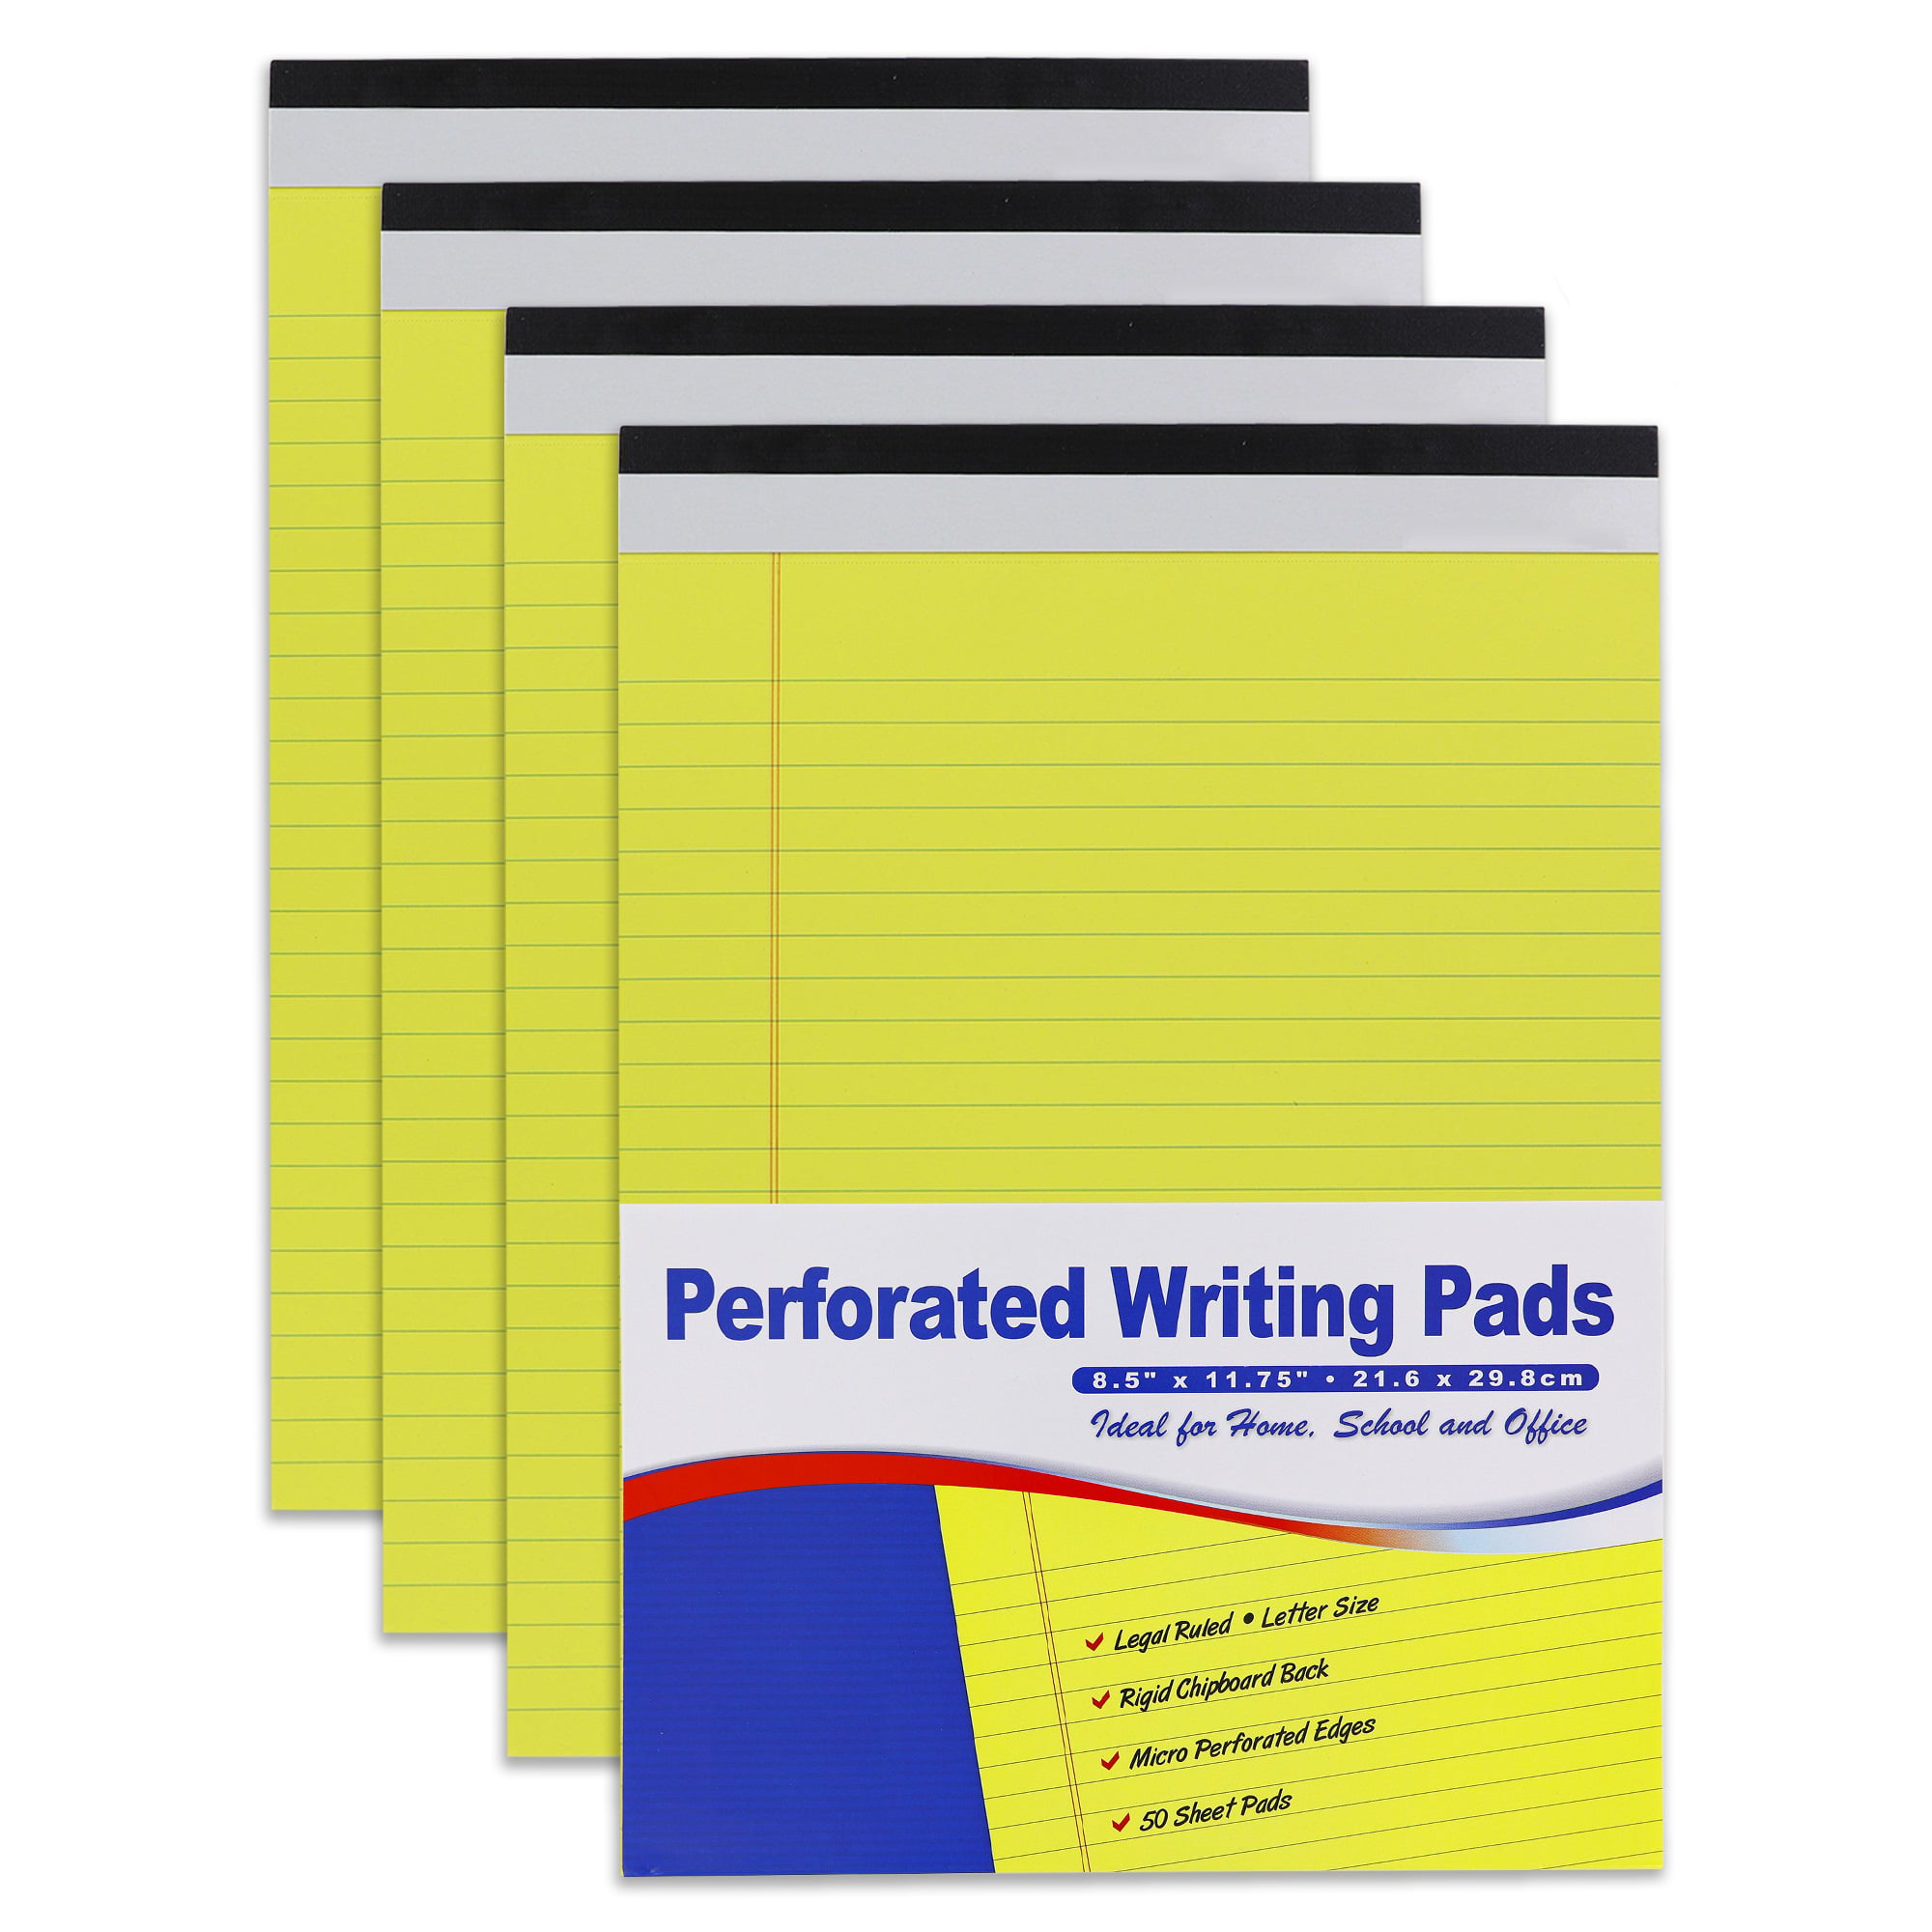 Work Basic 6pk - Office 8.5in x 11in Pastel Set 2 Mintra Office Legal Pads Micro perforated Writing Pad/Notebook Paper for School 50 Sheets per Notepad College Wide Ruled